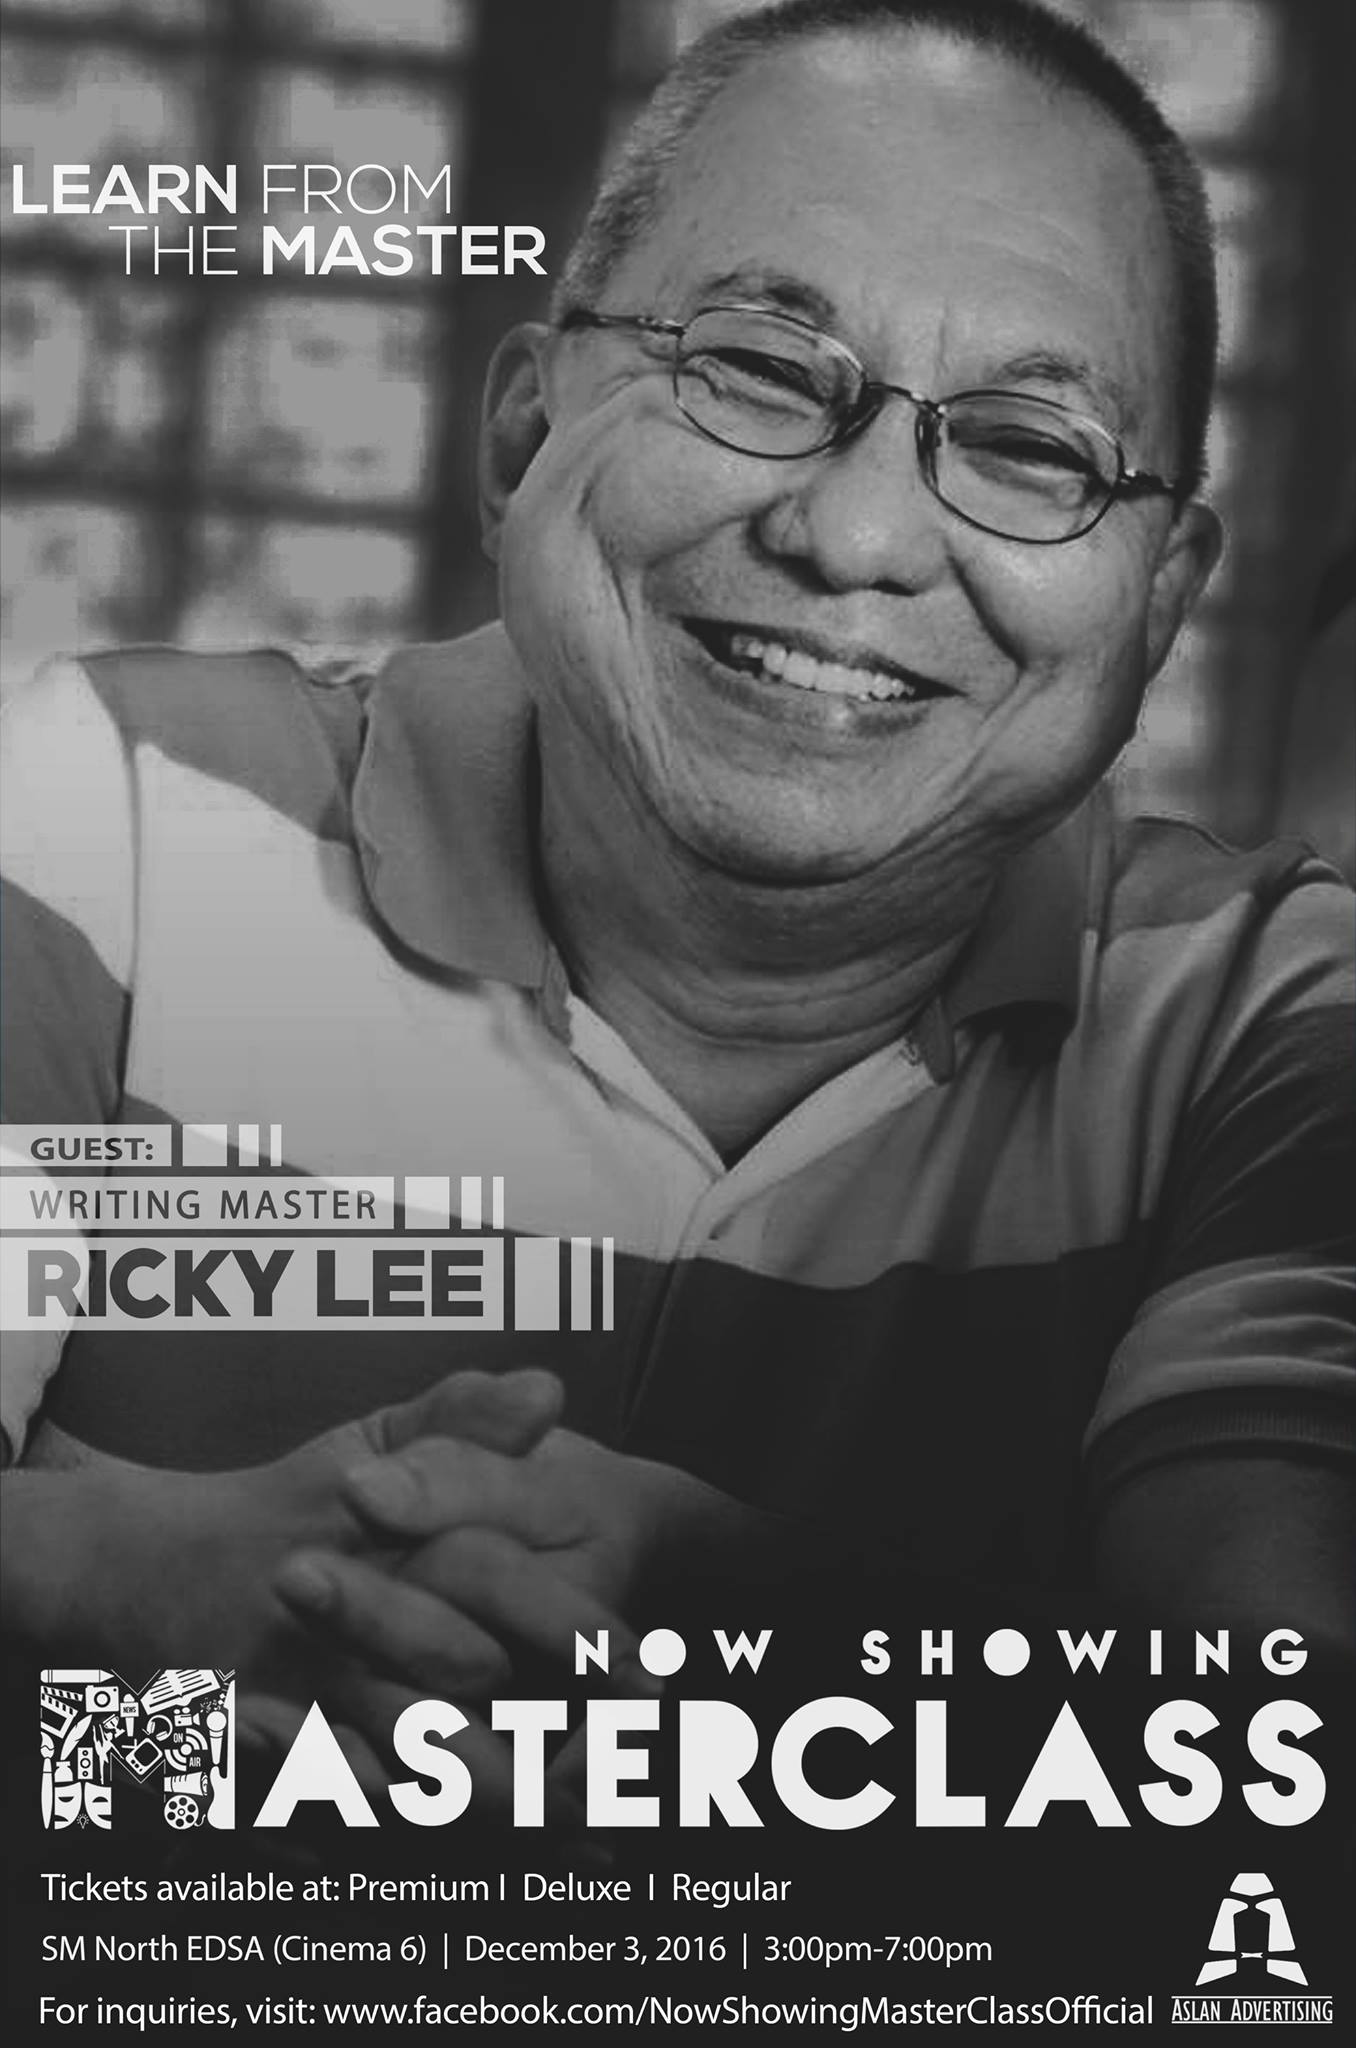 Now Showing: Master Class Like This Page · November 29, 2016 · Edited · Due to a popular public demand, we are officially announcing that the new schedule of our Master Class by Sir Ricky Lee is on January 21, 2017. We intend to give way to everyone who could not make it to December 3. For those who already paid for their tickets, good news! We are giving away book discount voucher for you! Please claim your voucher from your ticket seller. Sir Ricky Lee's books are available in the venue after the event. Tickets are on hand, grab yours now!